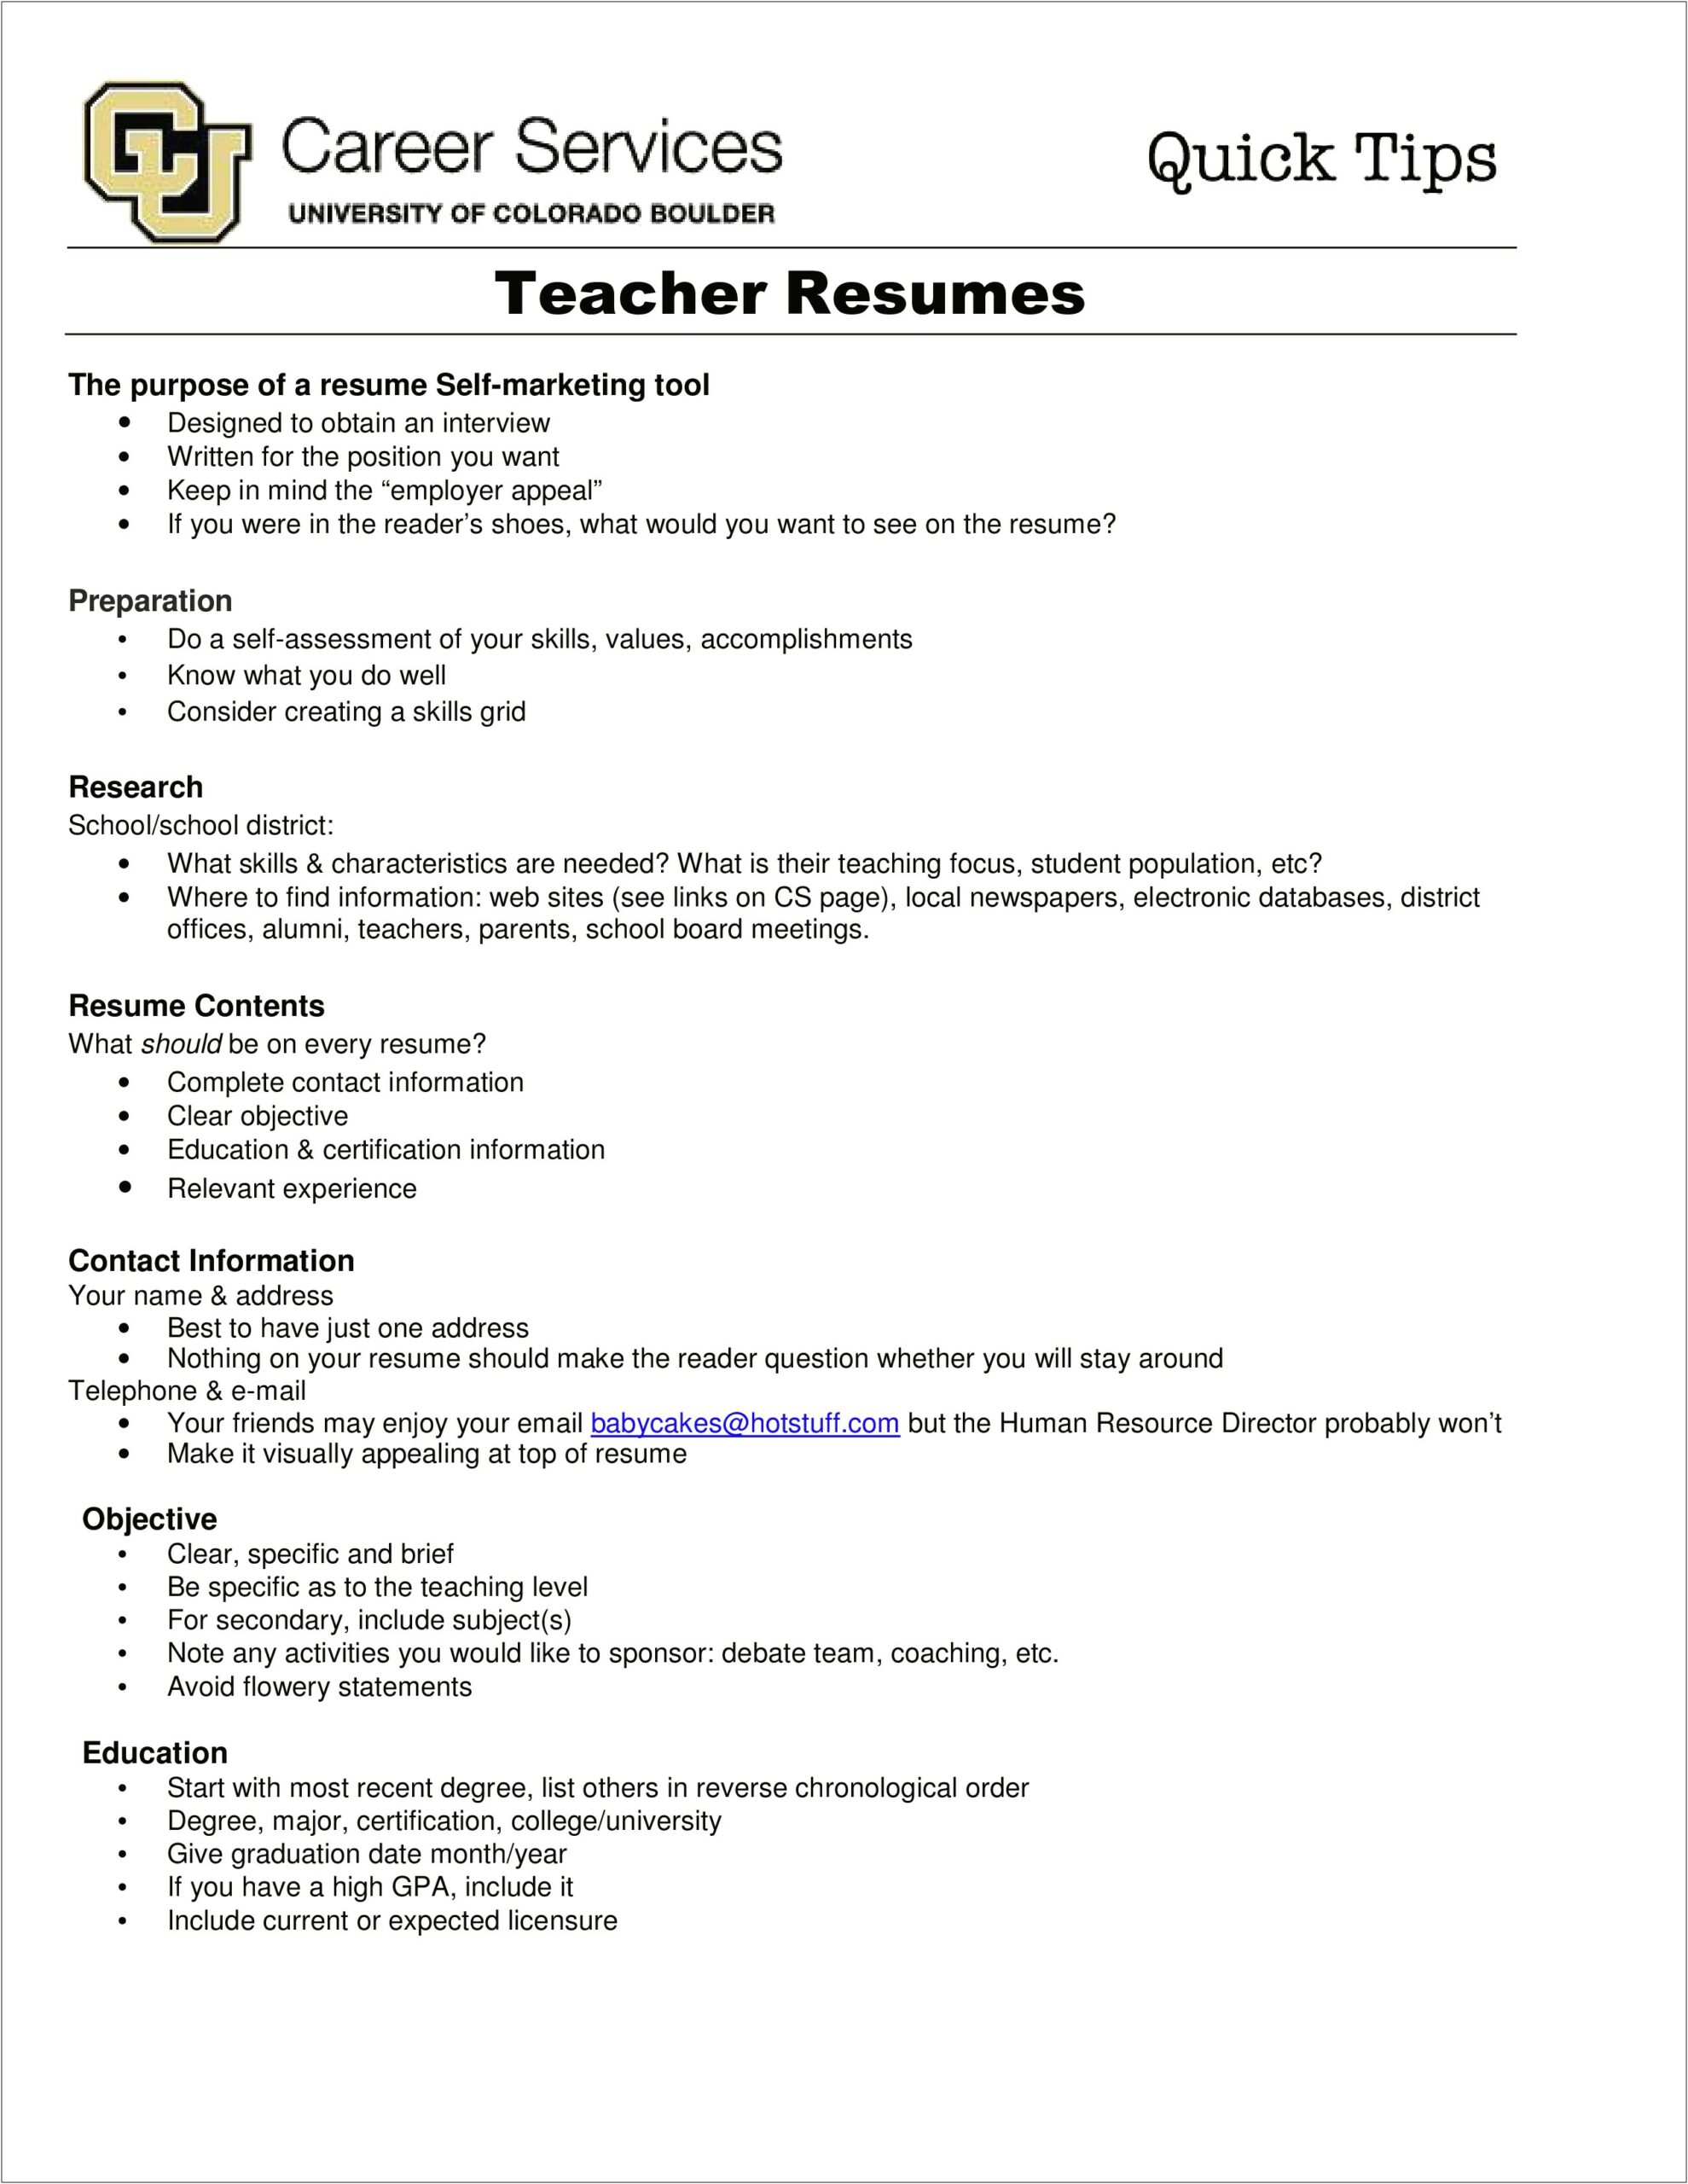 Would You Put Current School In Resume